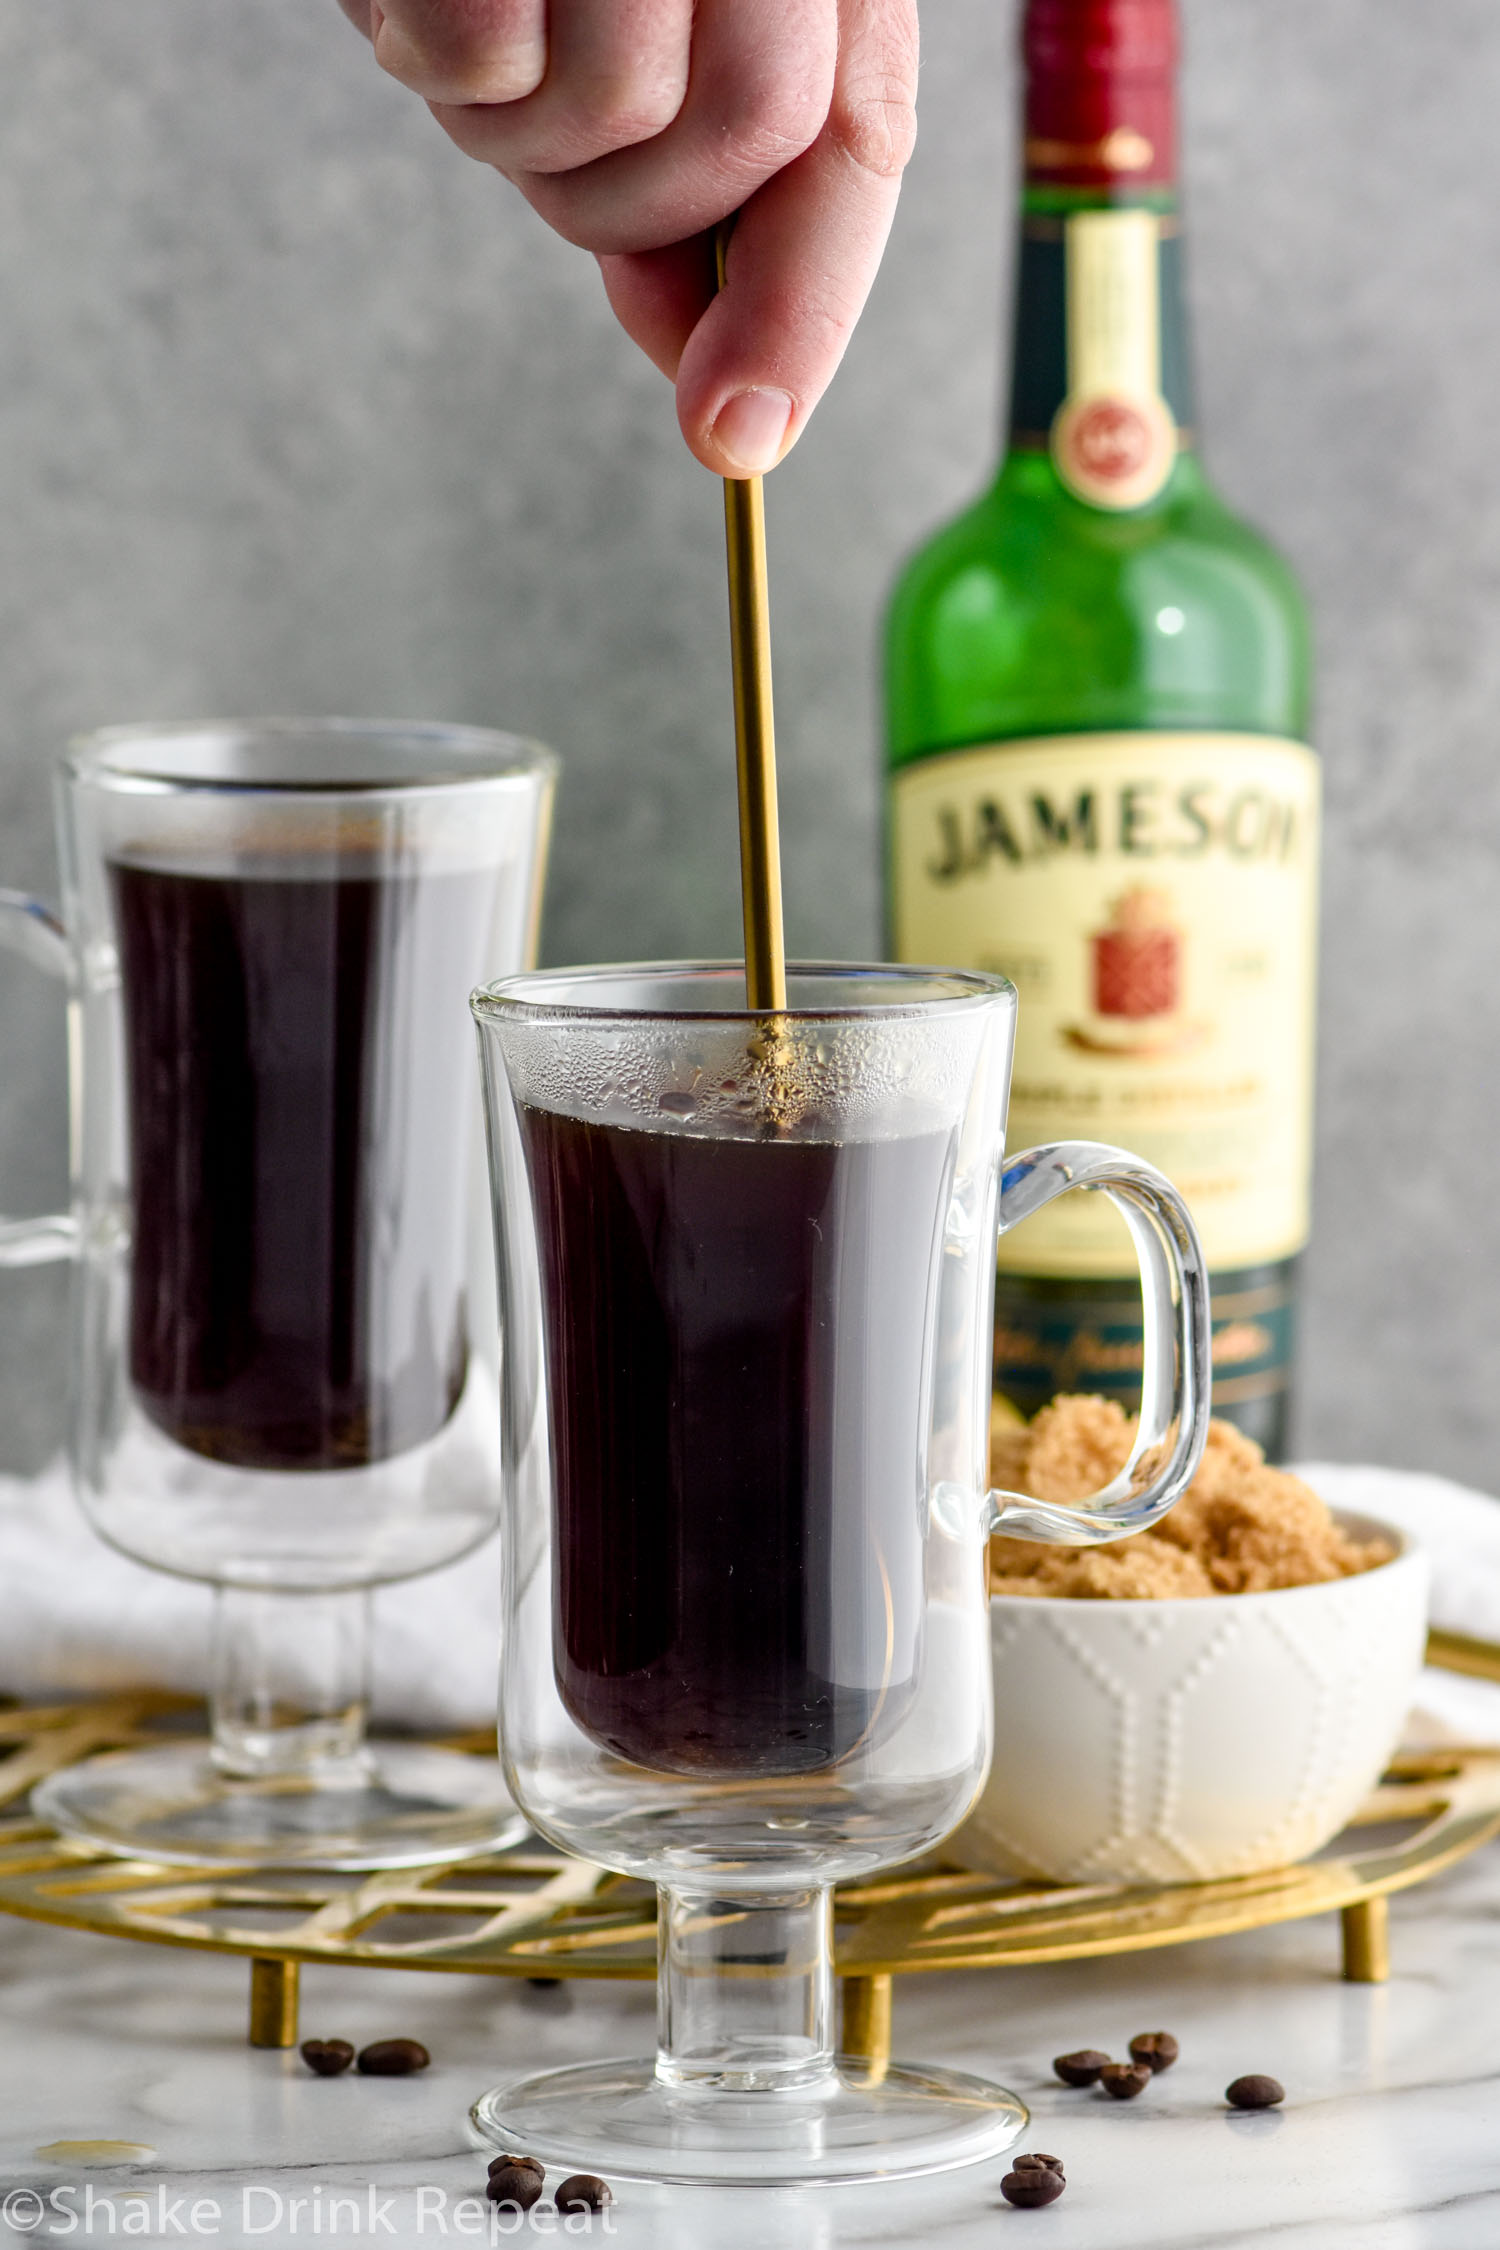 Photo of two mugs of coffee for Irish Coffee recipe. Person's hand shown stirring one mug. Bowl of brown sugar and a bottle of Jameson Irish Whiskey in the background.